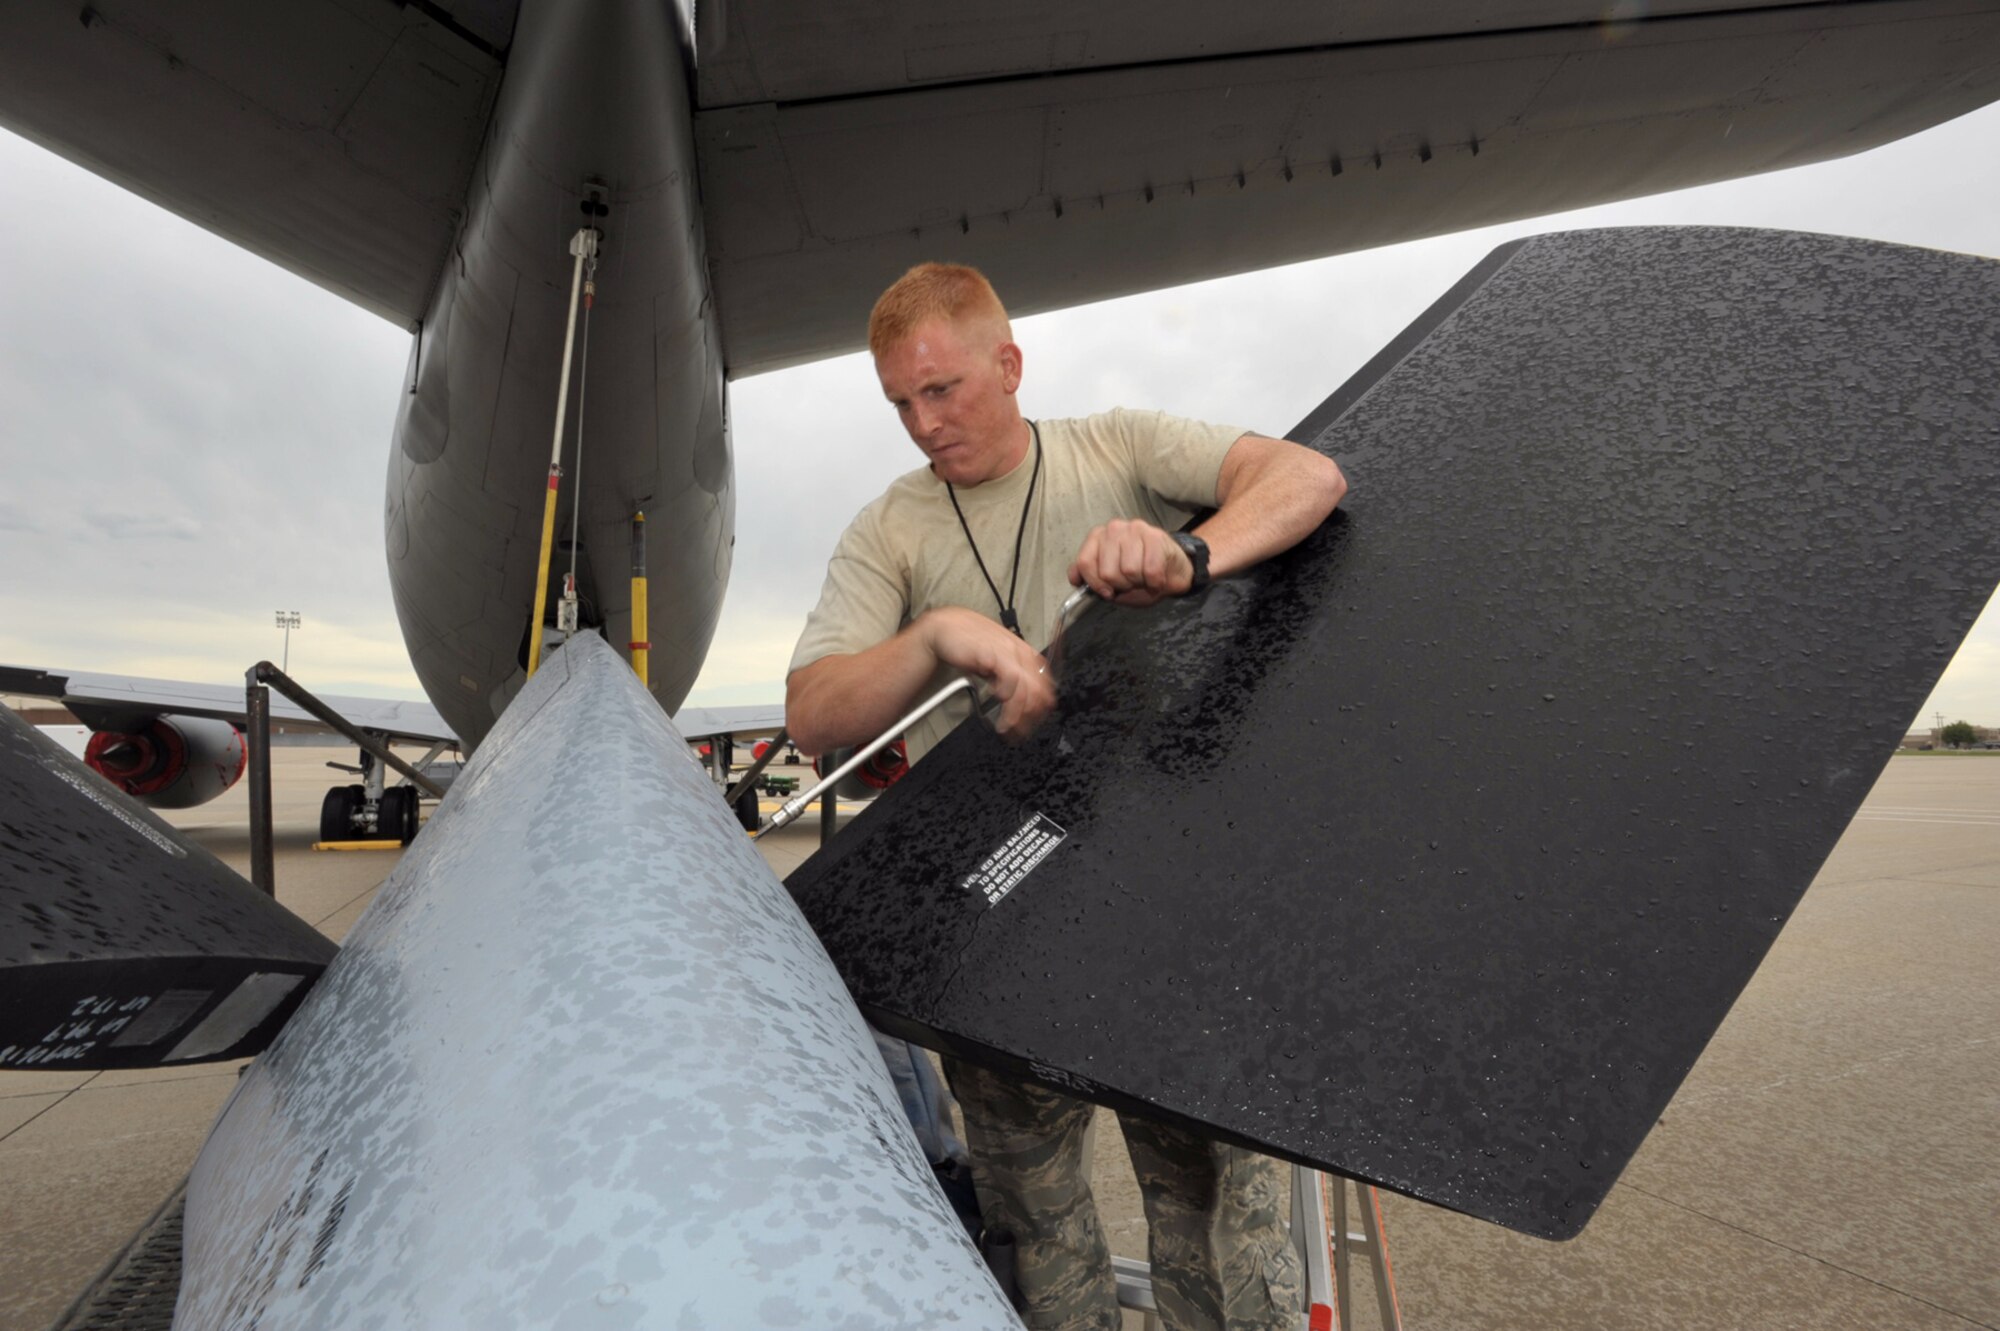 Rain pours down on Senior Airman Chris Hughes as he reattaches a panel to the boom pod of a KC-135 Stratotanker Friday at McConnell Air Force Base, Kan. Airman Hughes is assigned to the 22nd Air Refueling Wing, the 931st Air Refueling Group's active-duty host unit at McConnell. Reservists from the 931st and active-duty Airmen from the 22nd, including Airman Hughes, are scheduled to compete at Air Mobility Command's annual readiness competition for the first time. (U.S. Air Force photo/Tech. Sgt. Jason Schaap)